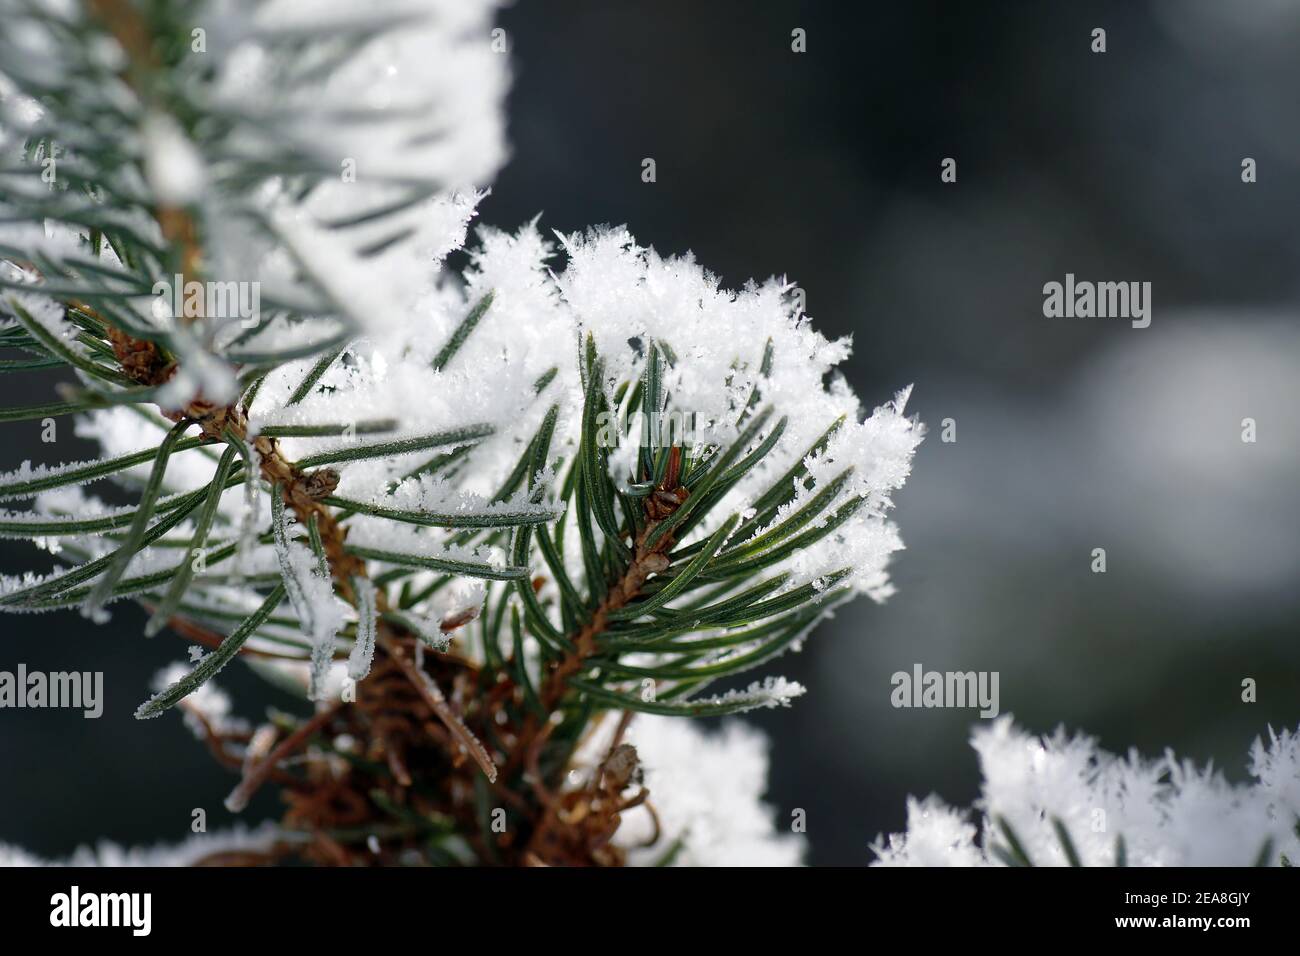 White spruce tree covered in snow flakes macro Stock Photo